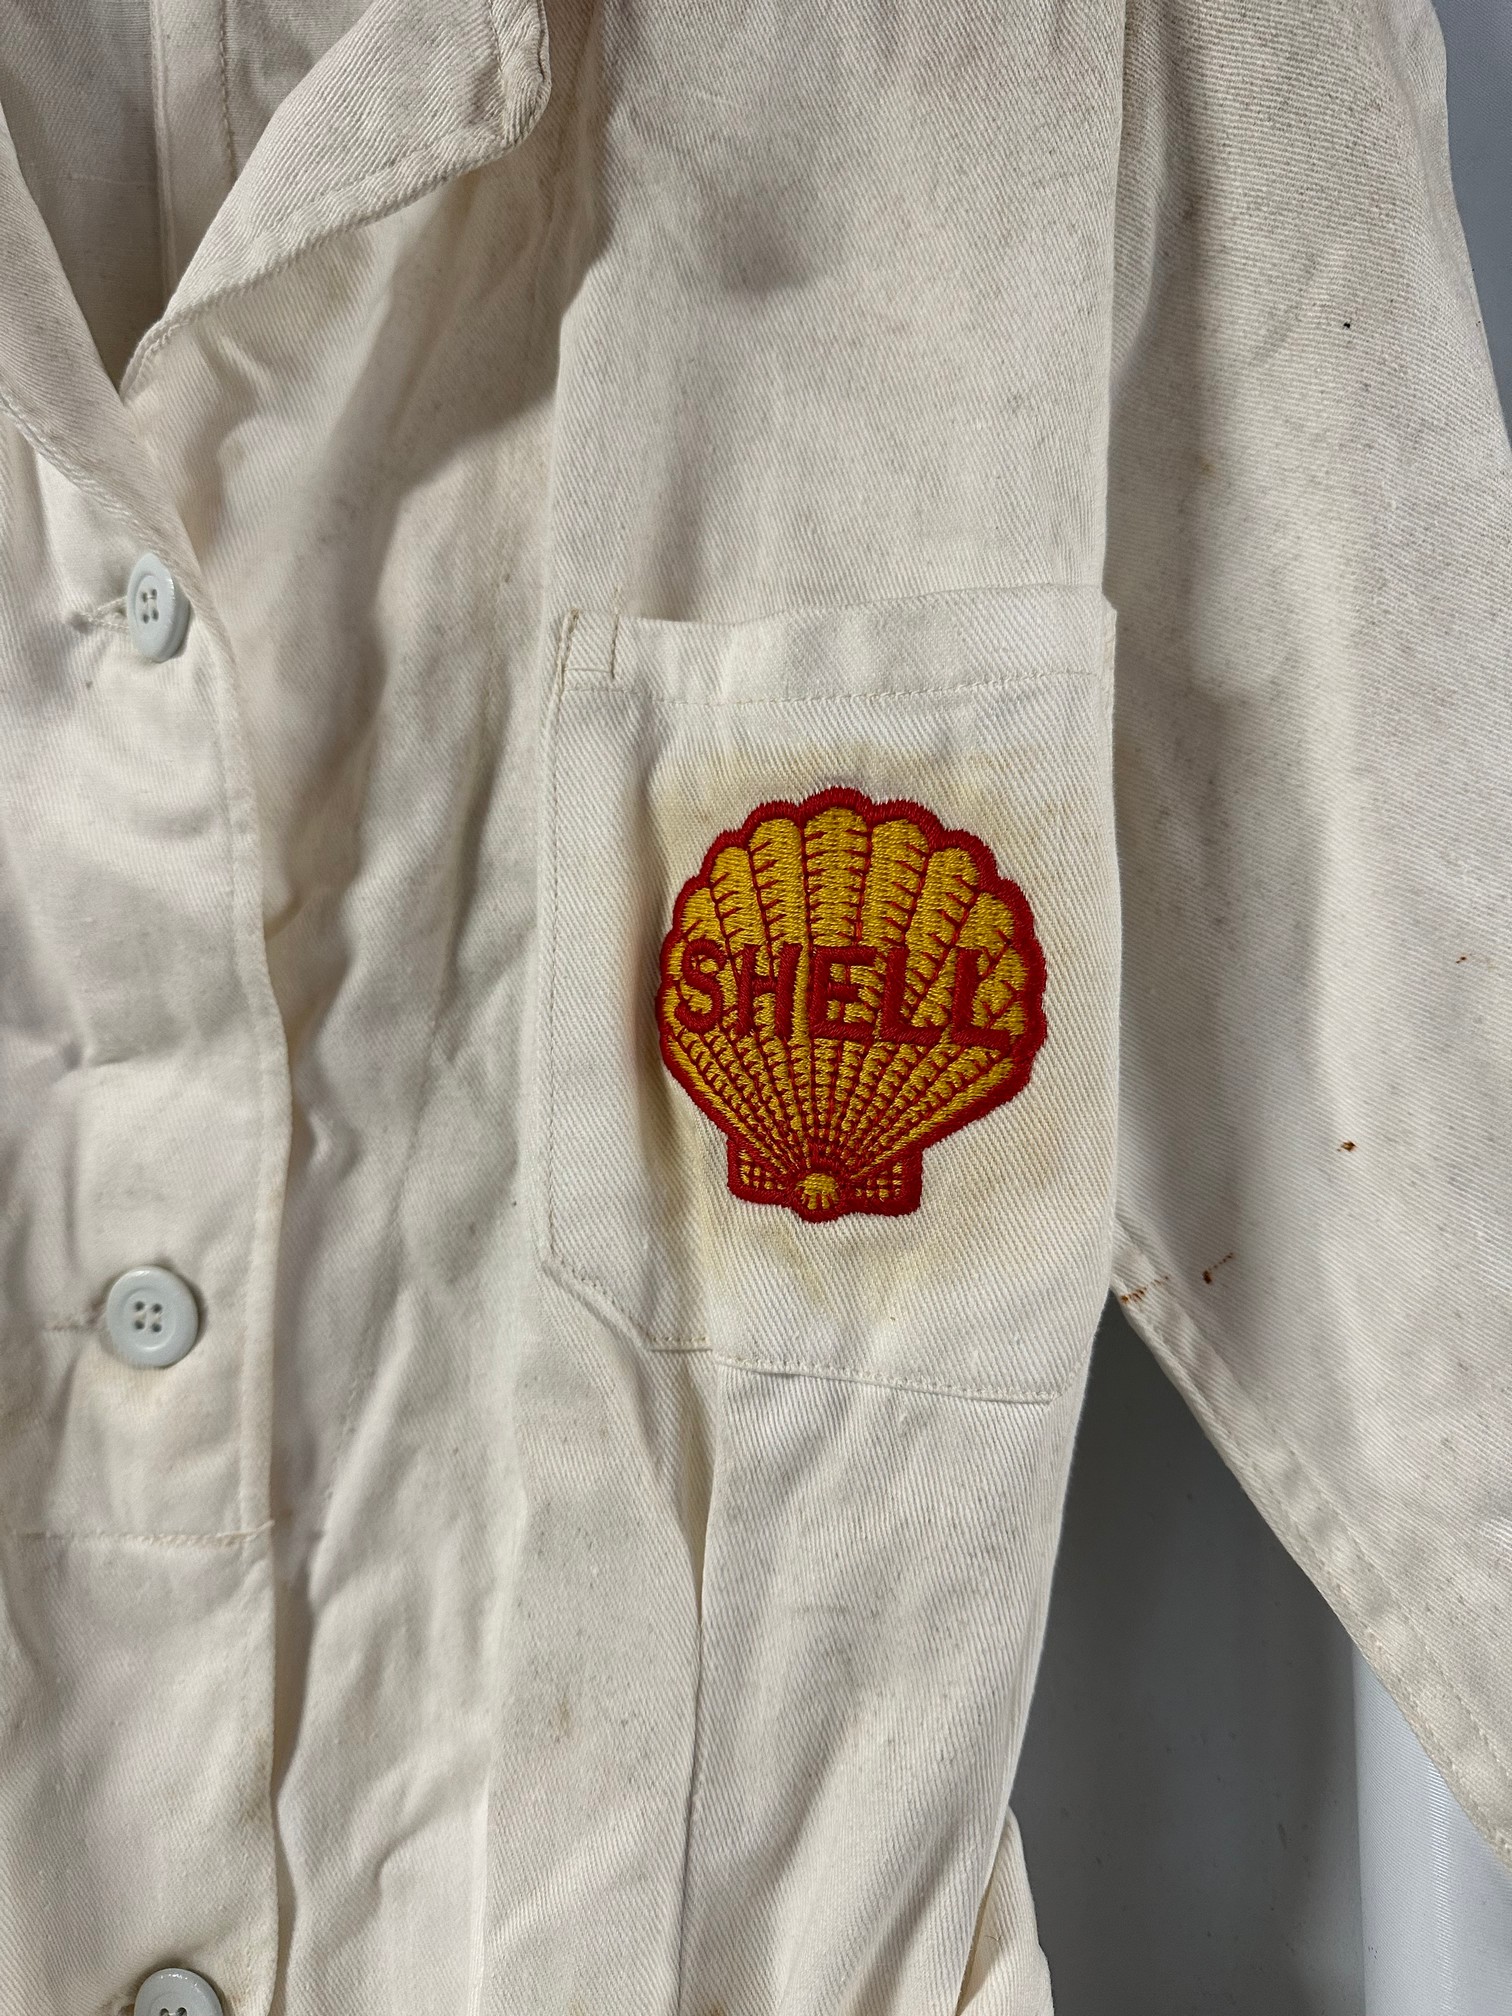 A Shell overall, some signs of mould, appears unused. - Image 2 of 4